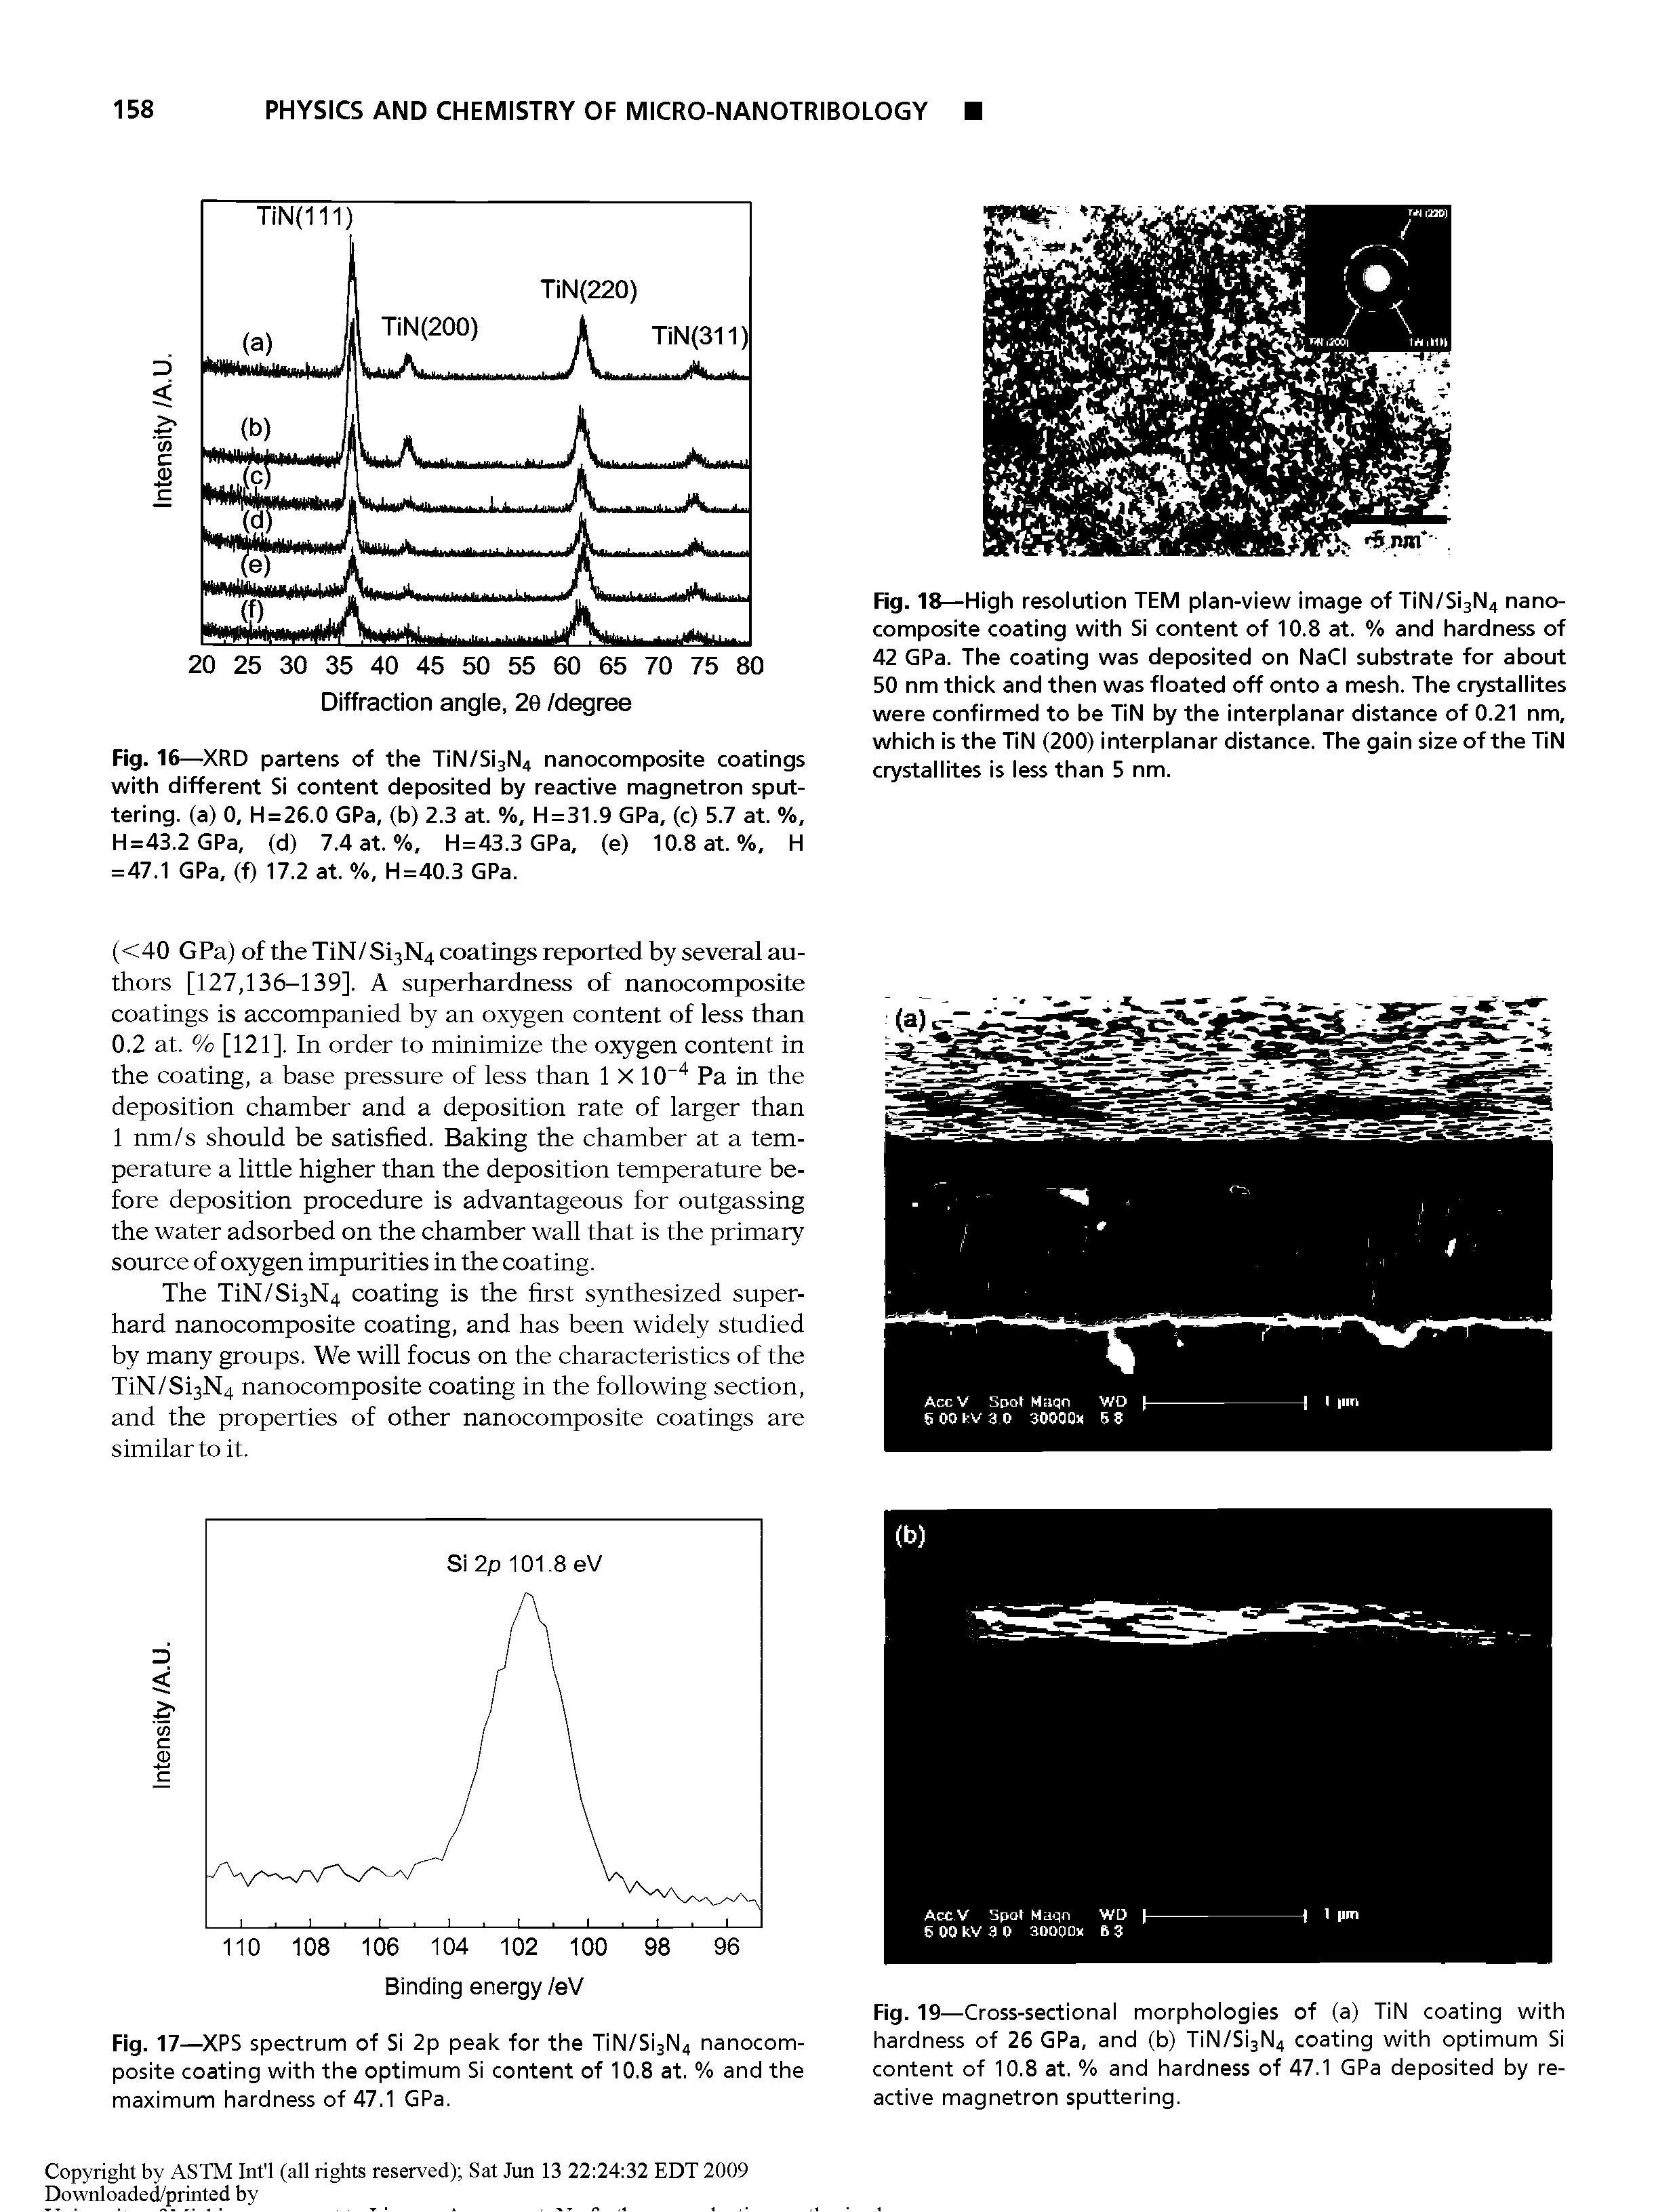 Fig. 19 —Cross-sectional morphologies of (a) TiN coating with hardness of 26 GPa, and (b) TiN/Si3N4 coating with optimum Si content of 10.8 at. % and hardness of 47.1 GPa deposited by reactive magnetron sputtering.